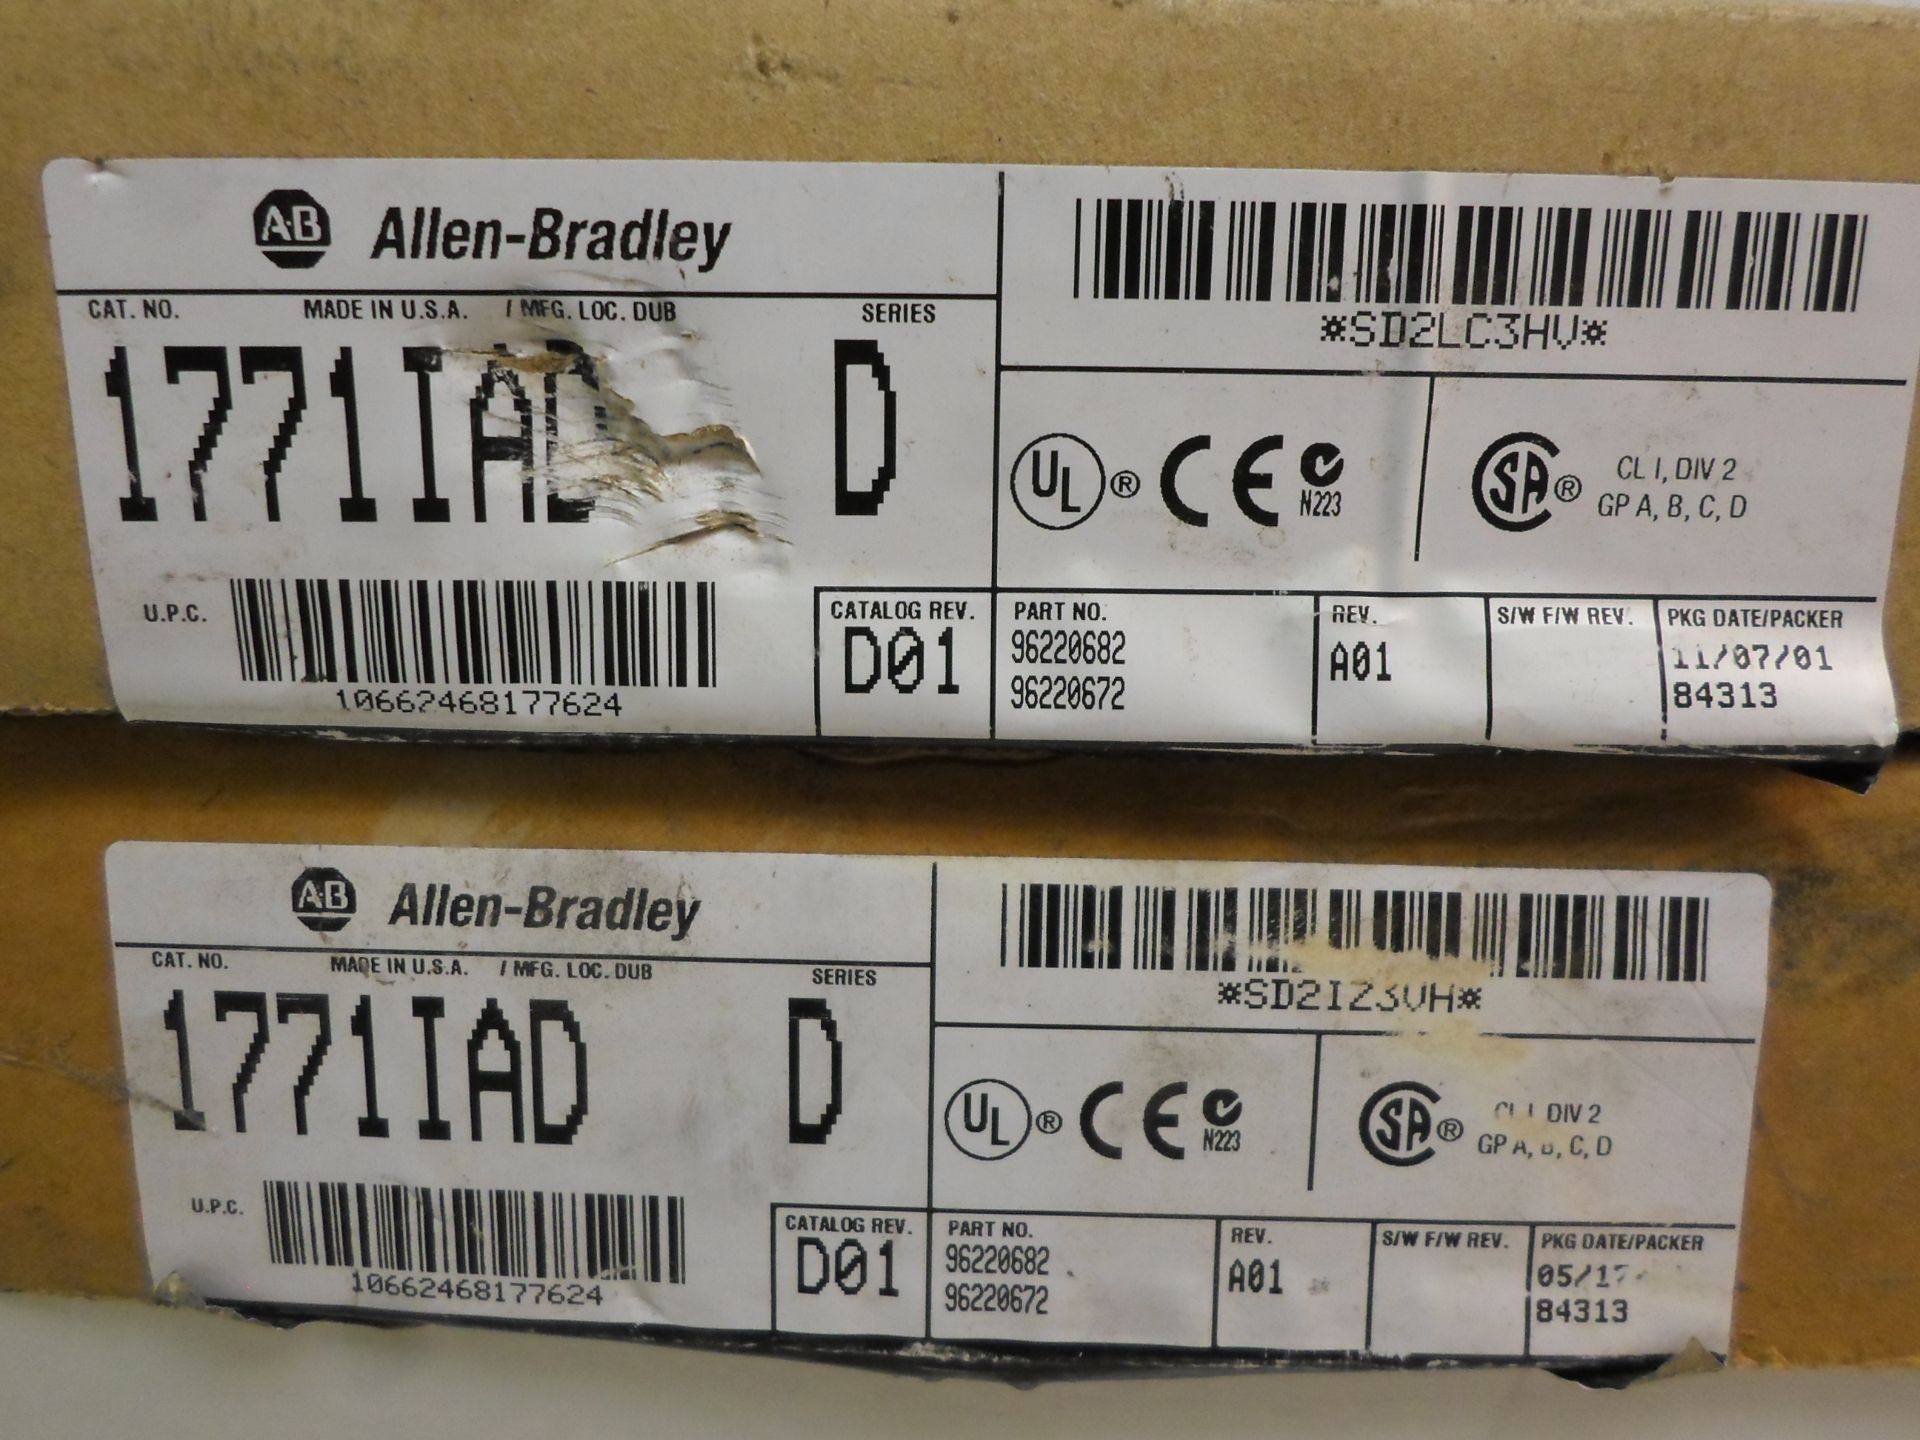 LOT OF TWO NEW IN THE BOX ALLEN BRADLEY 1771IAD SERIES D - Image 2 of 3